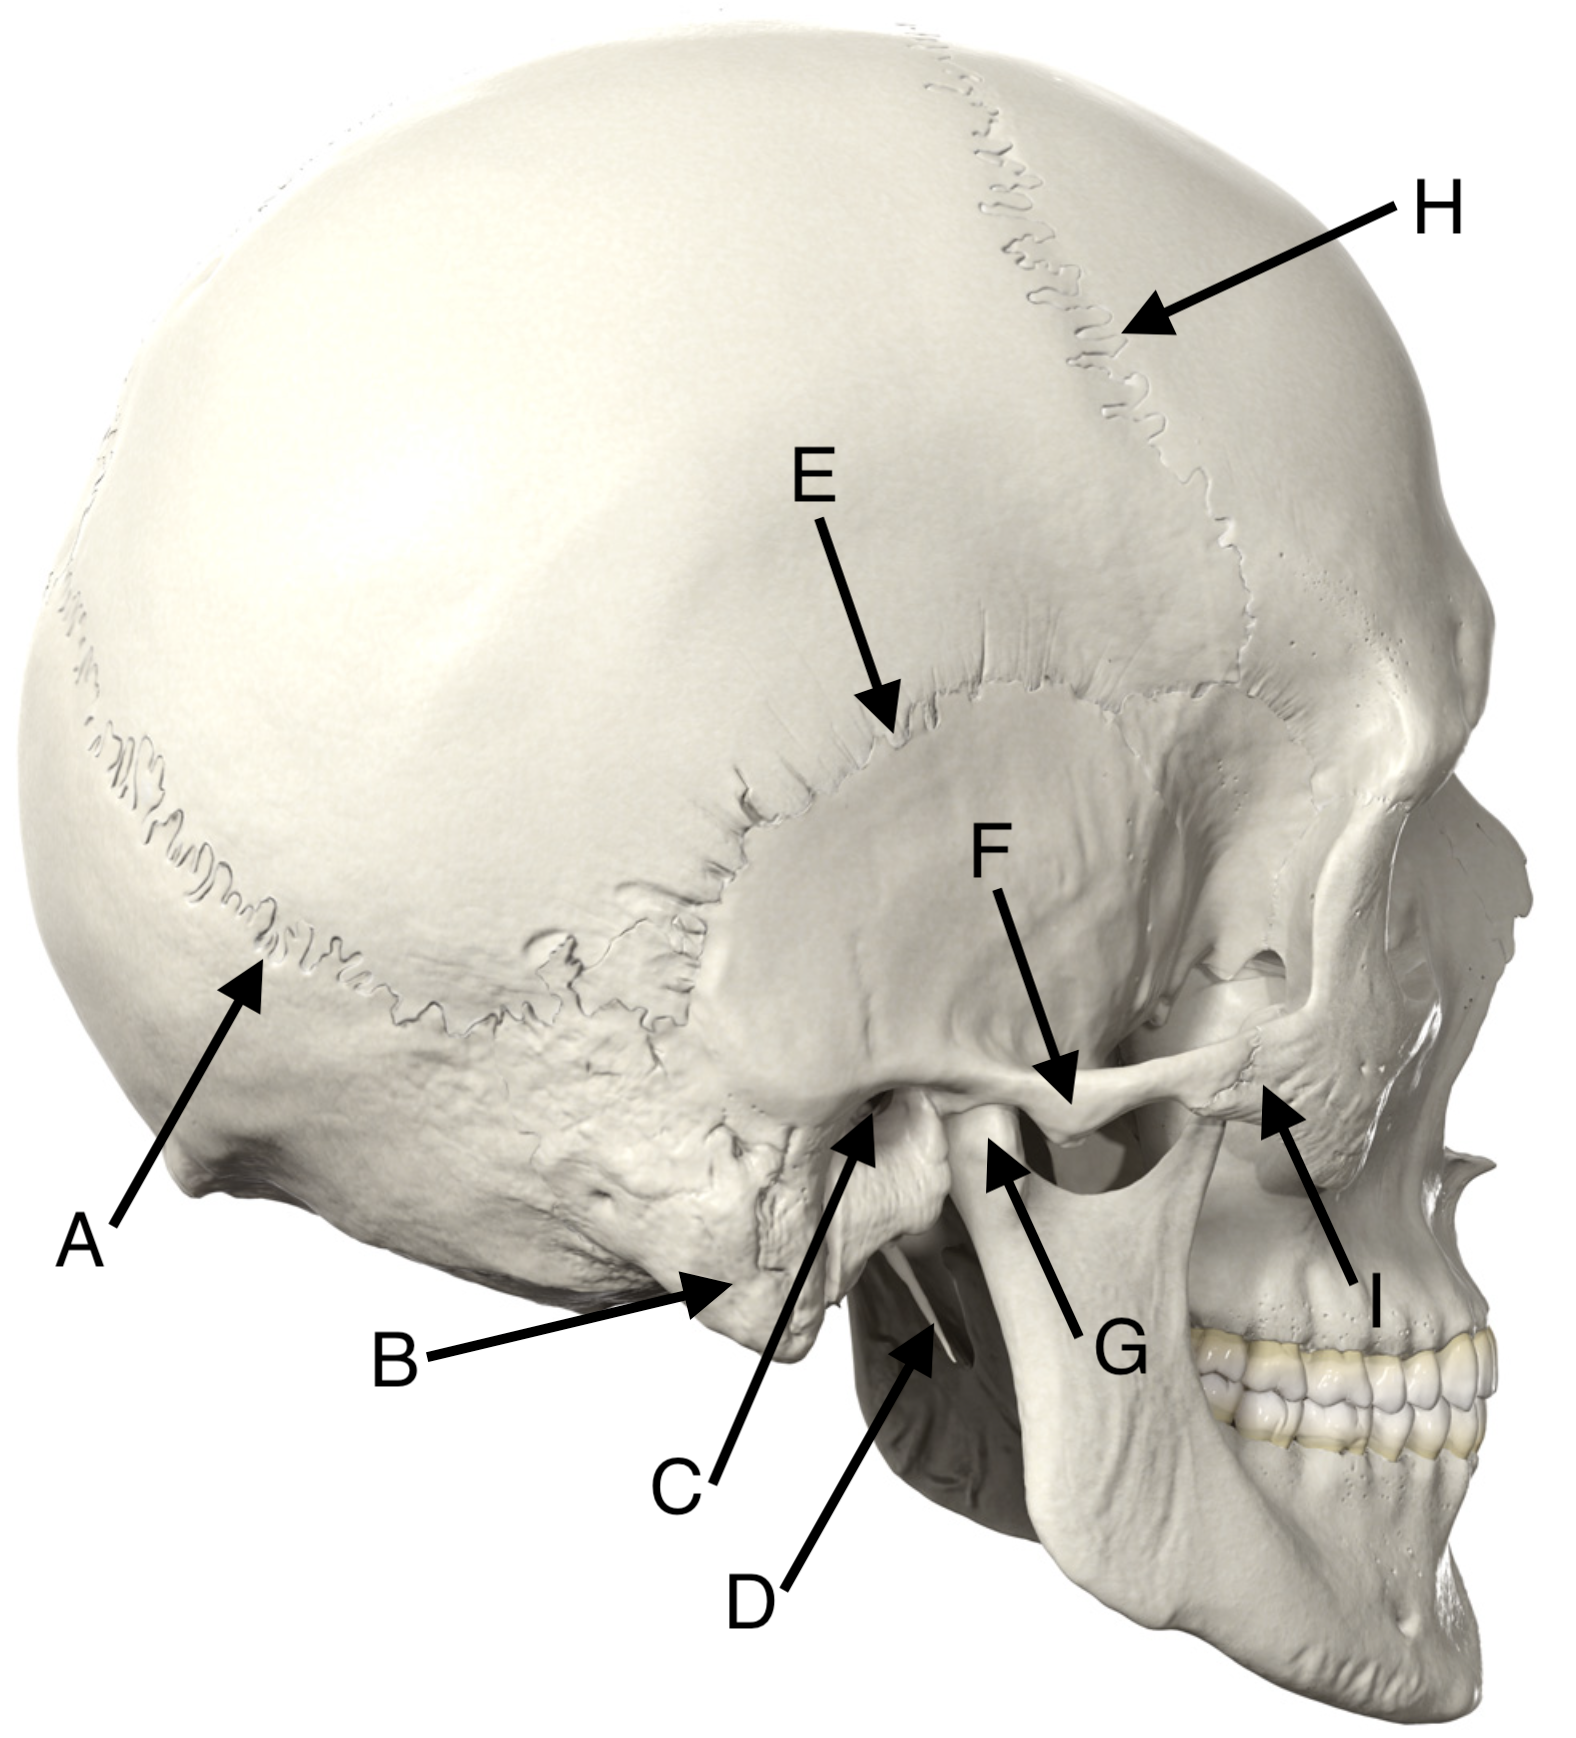 Skull Posterolateral View with Landmarks Lettered.png